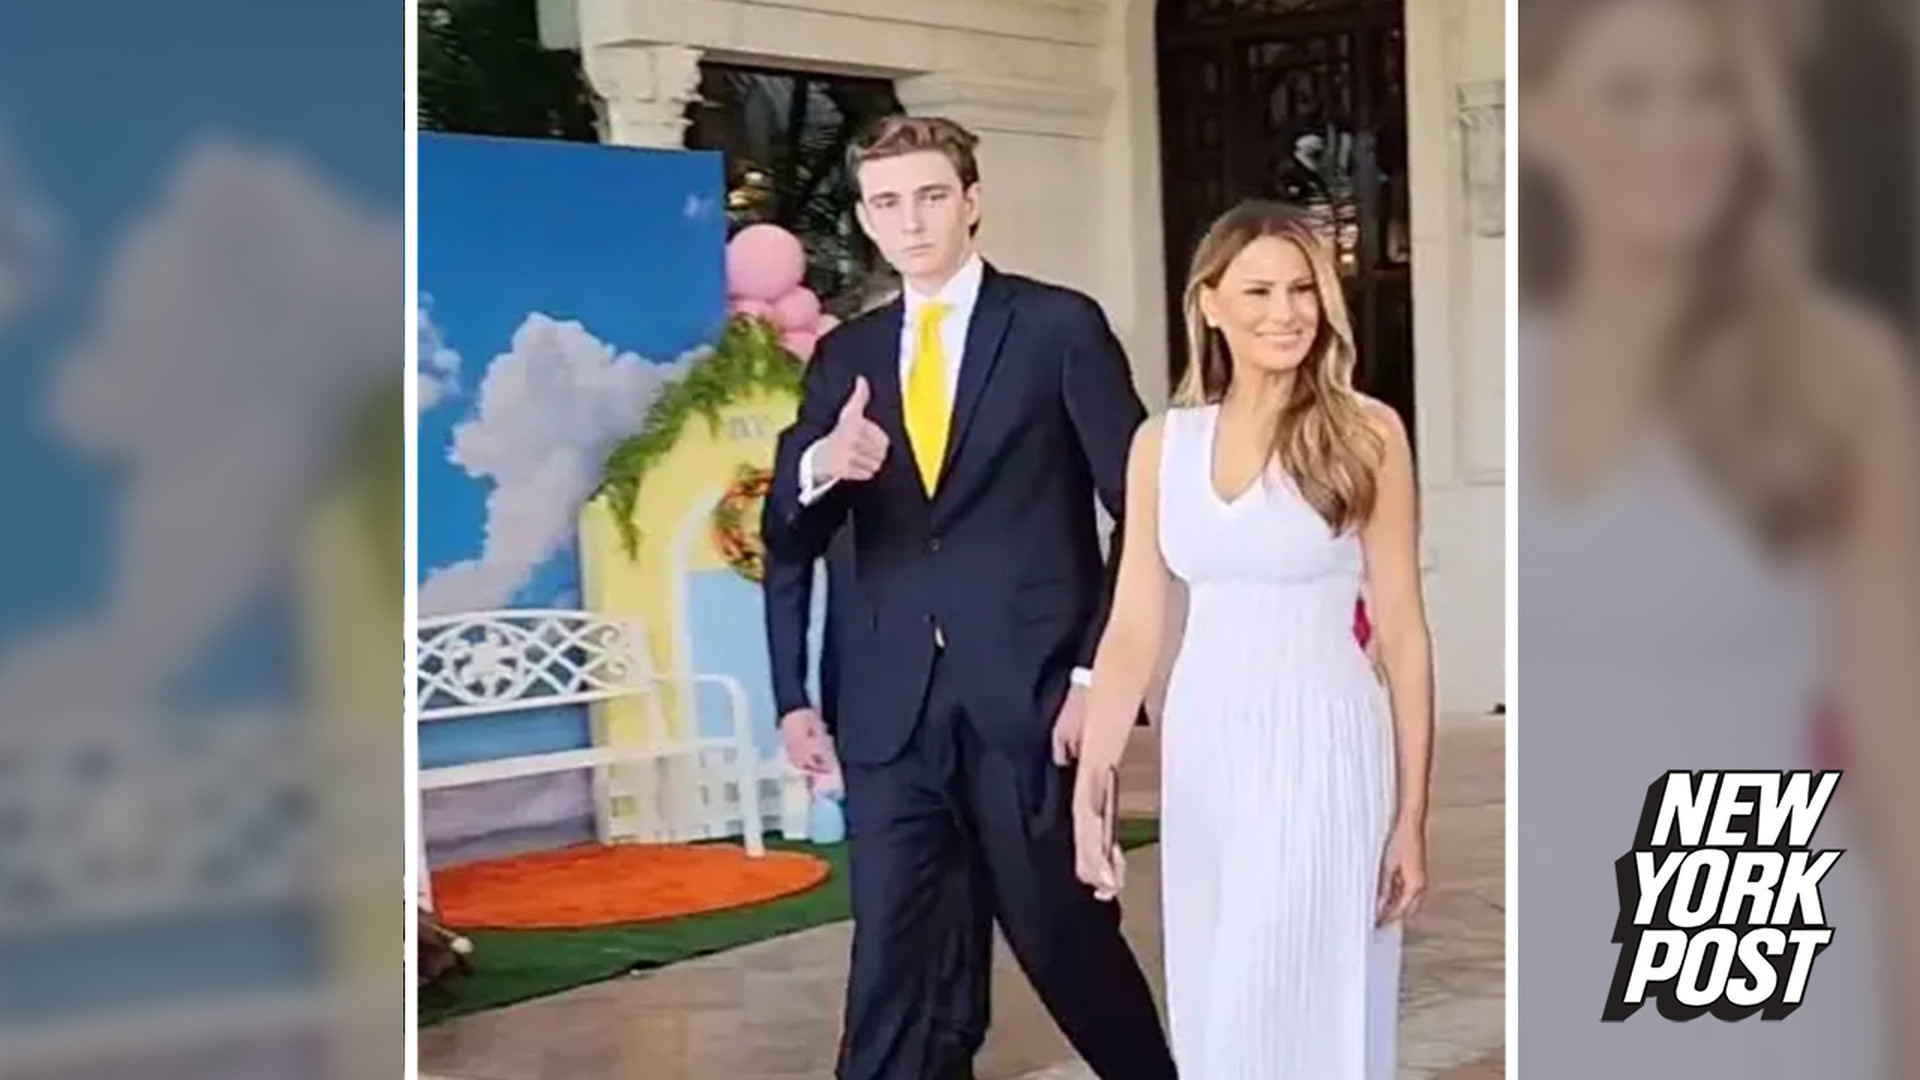 6-foot-7 Barron Trump towers over mom Melania in rare appearance with ...